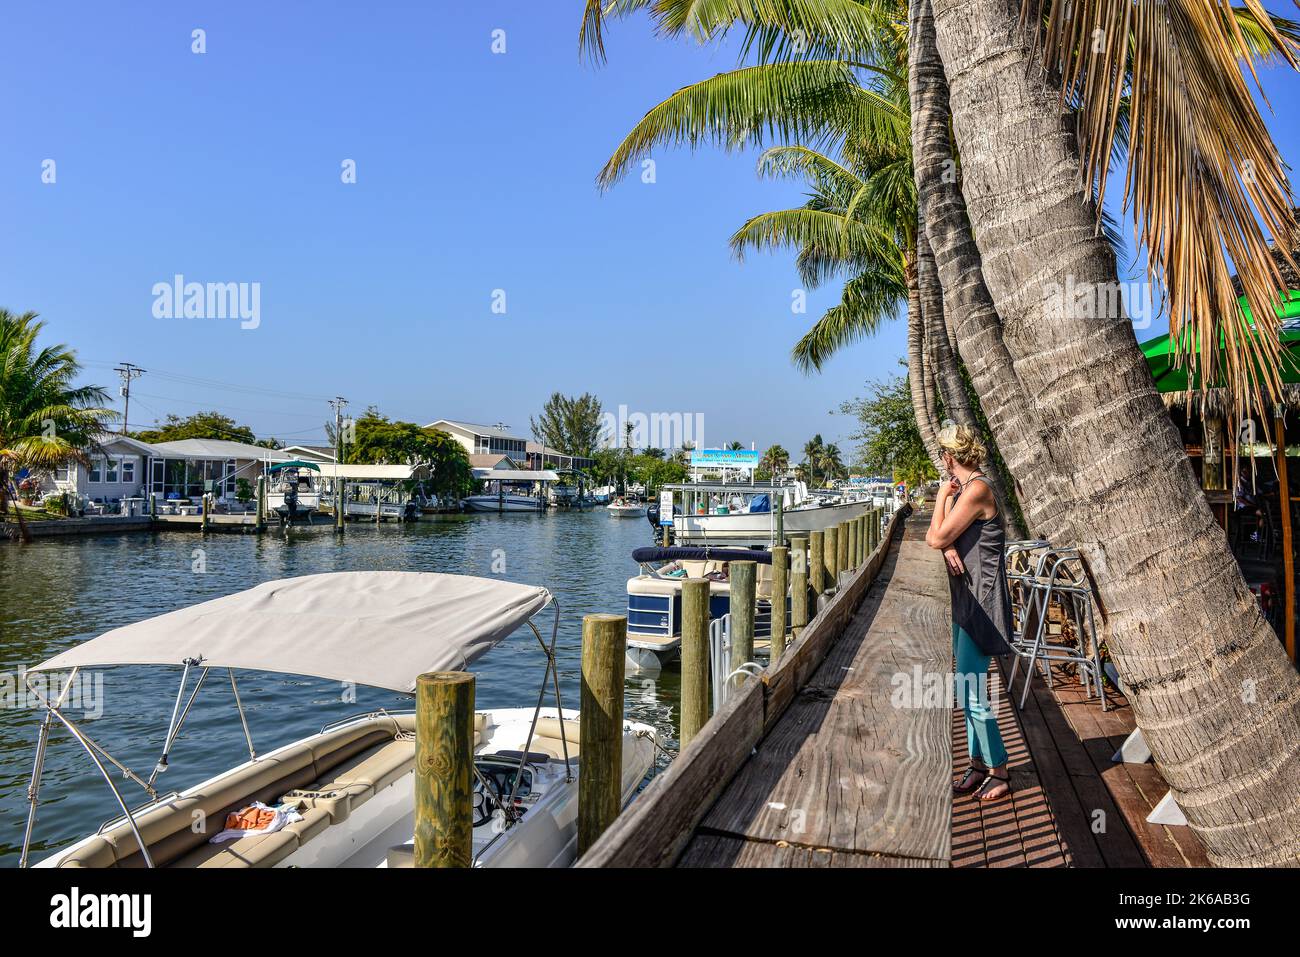 Woman viewing canal boat traffic and boats docked alongside Phuzzys Boat Shack restaurant & bar in St. James City, Pine Island, FL Stock Photo